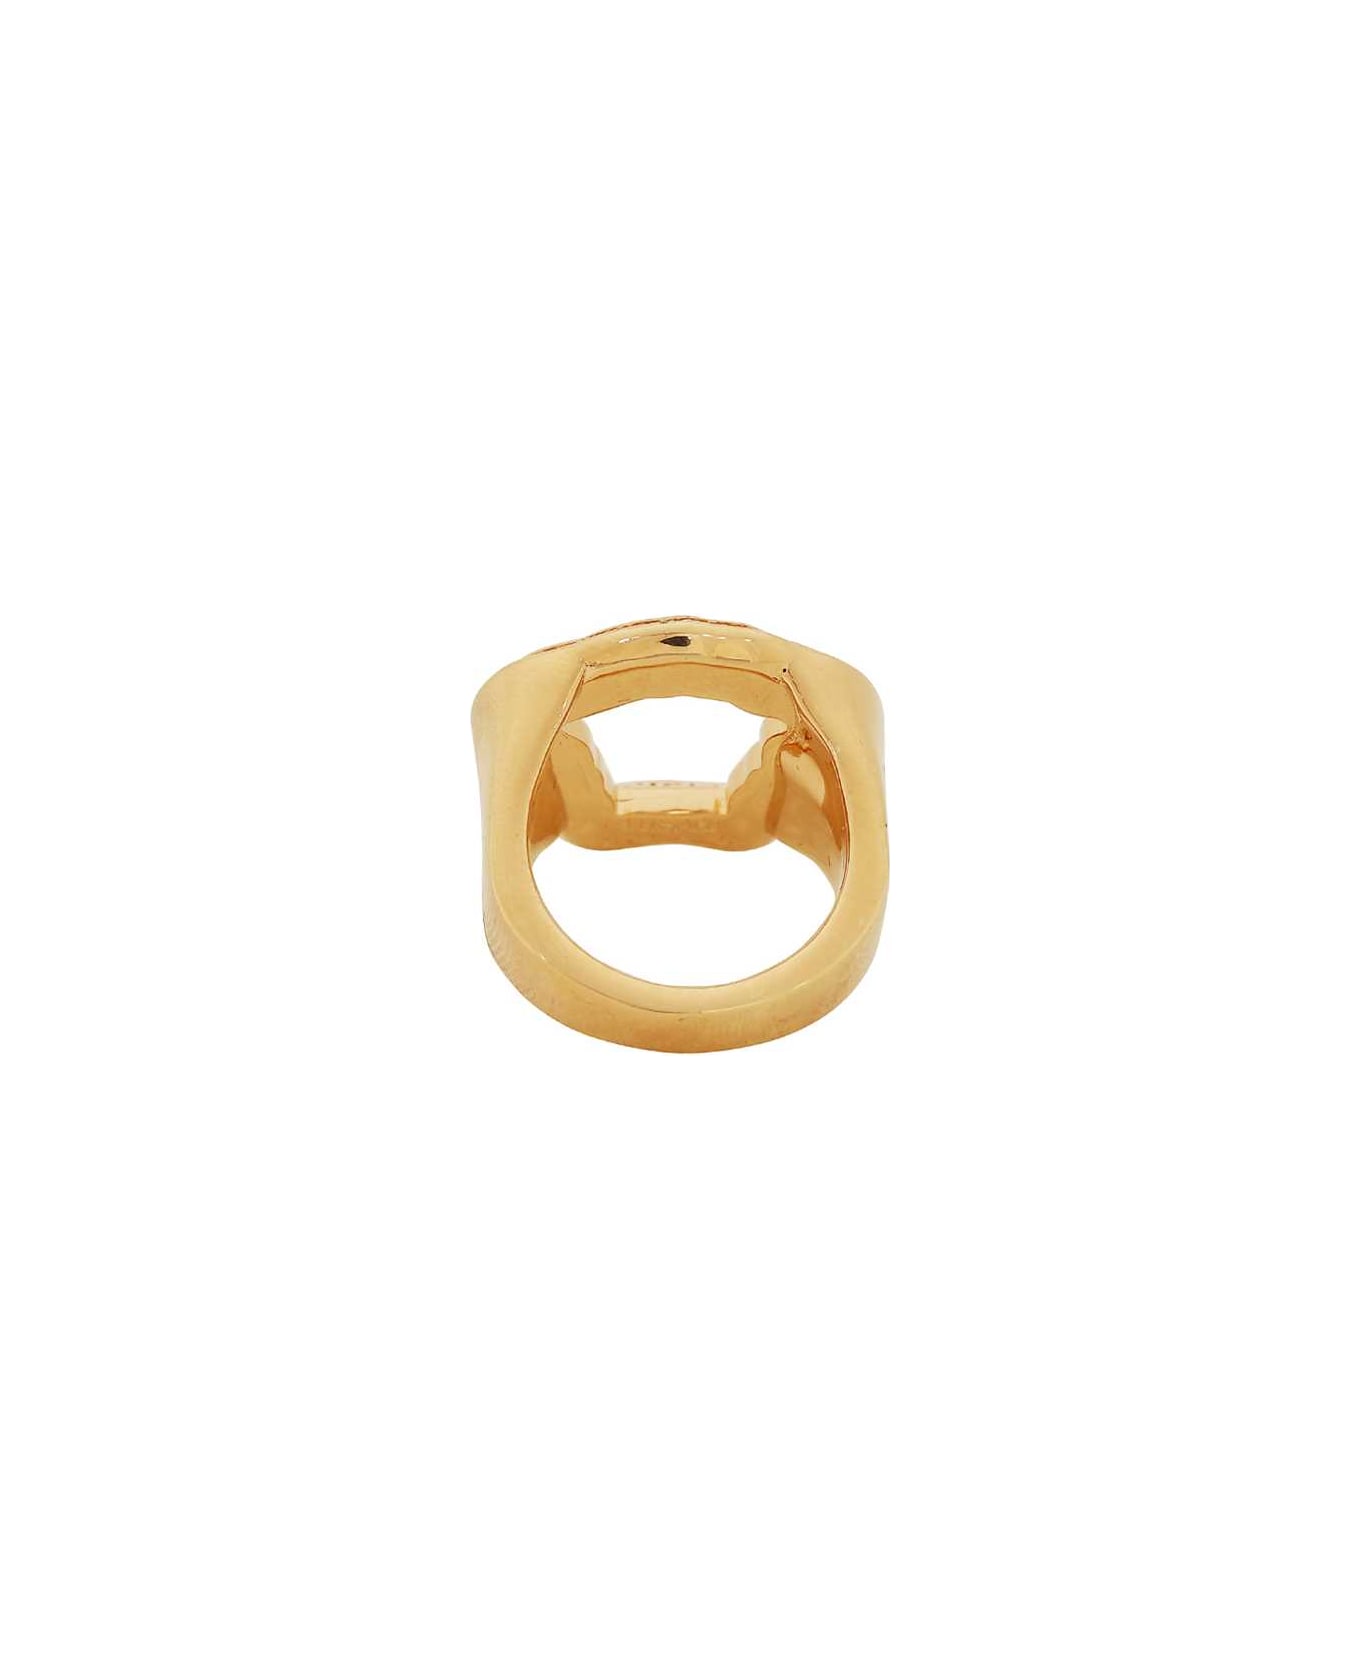 Versace Gold Plated Metal Ring - Gold